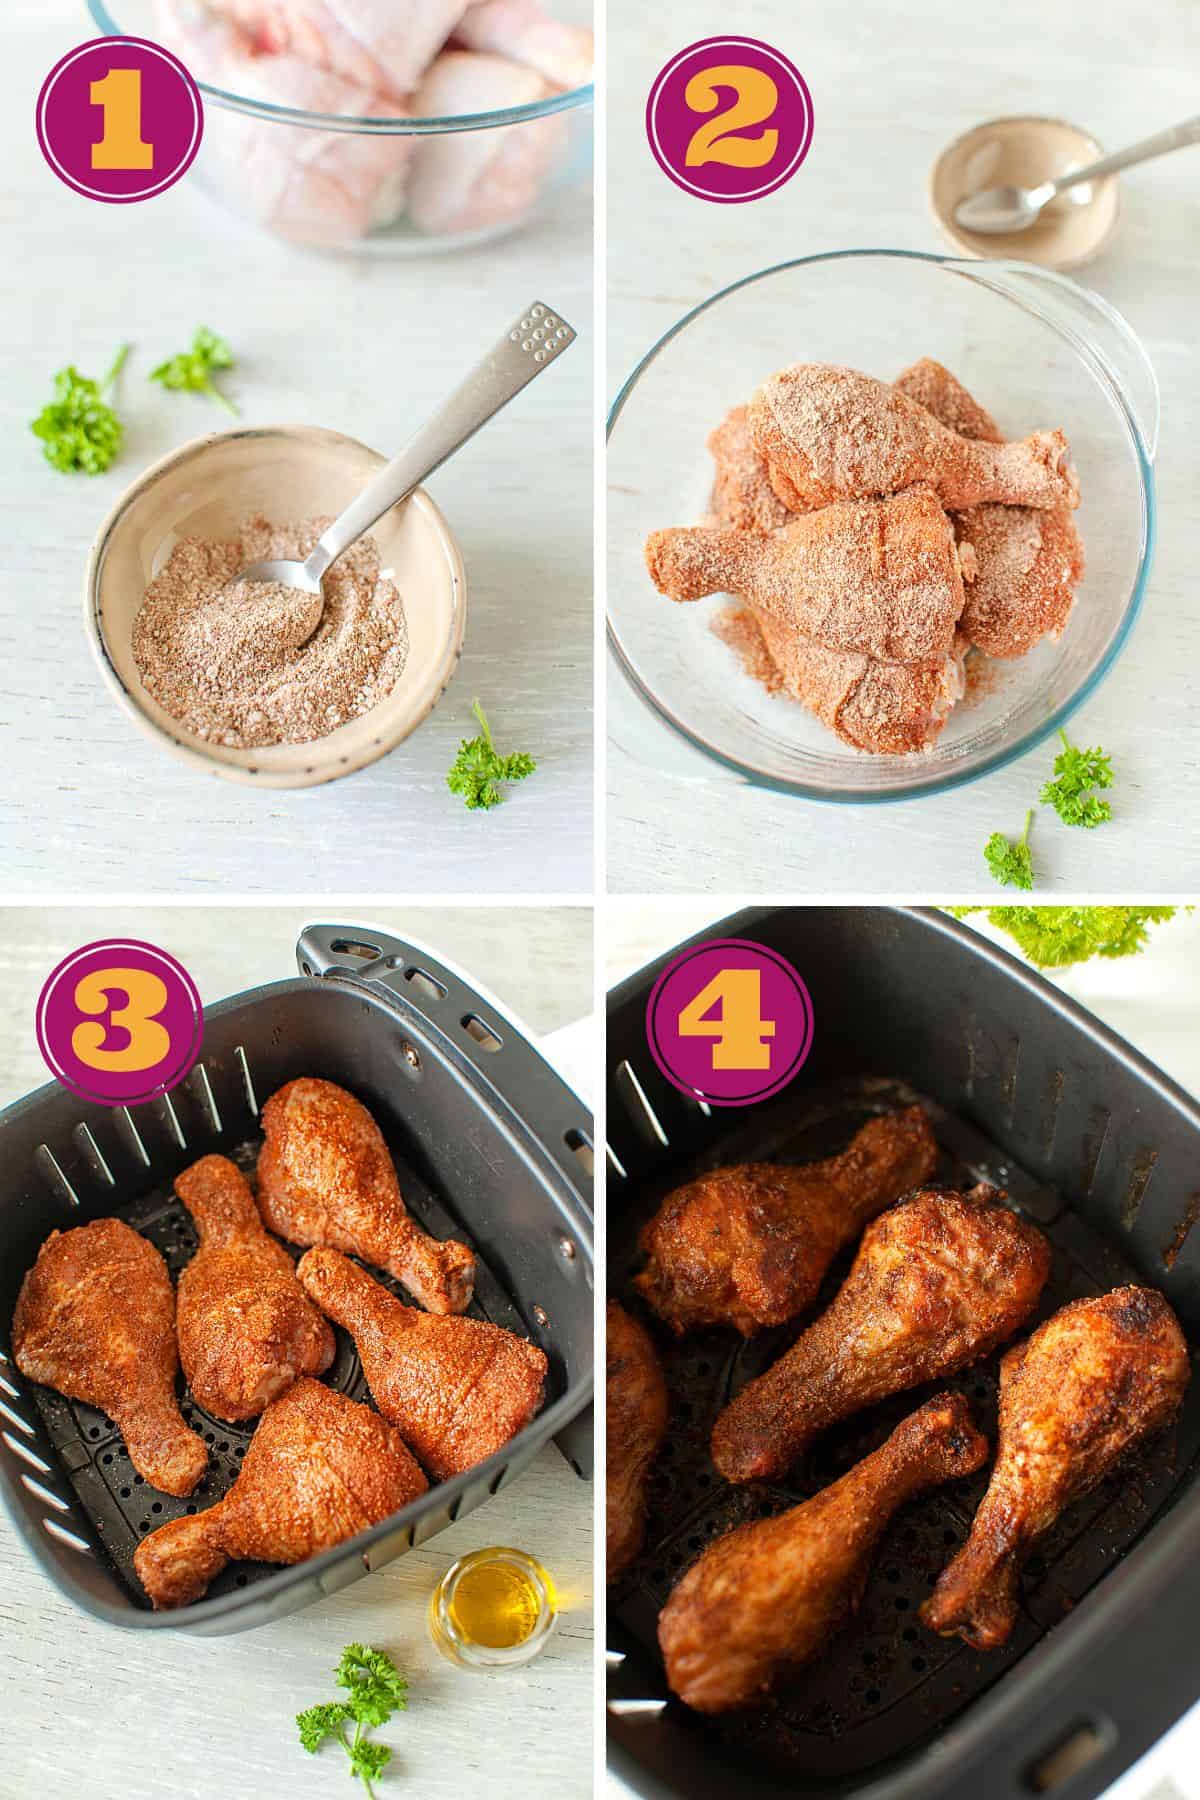 Four number images: first, a spice blend with a spoon in it, with parsley surrounding it; second, raw chicken legs in a mixing bowl covered in a spice blend; third, uncooked season chicken legs in an air fryer basket; and fourth, cooked air fryer chicken legs in the air fryer basket.